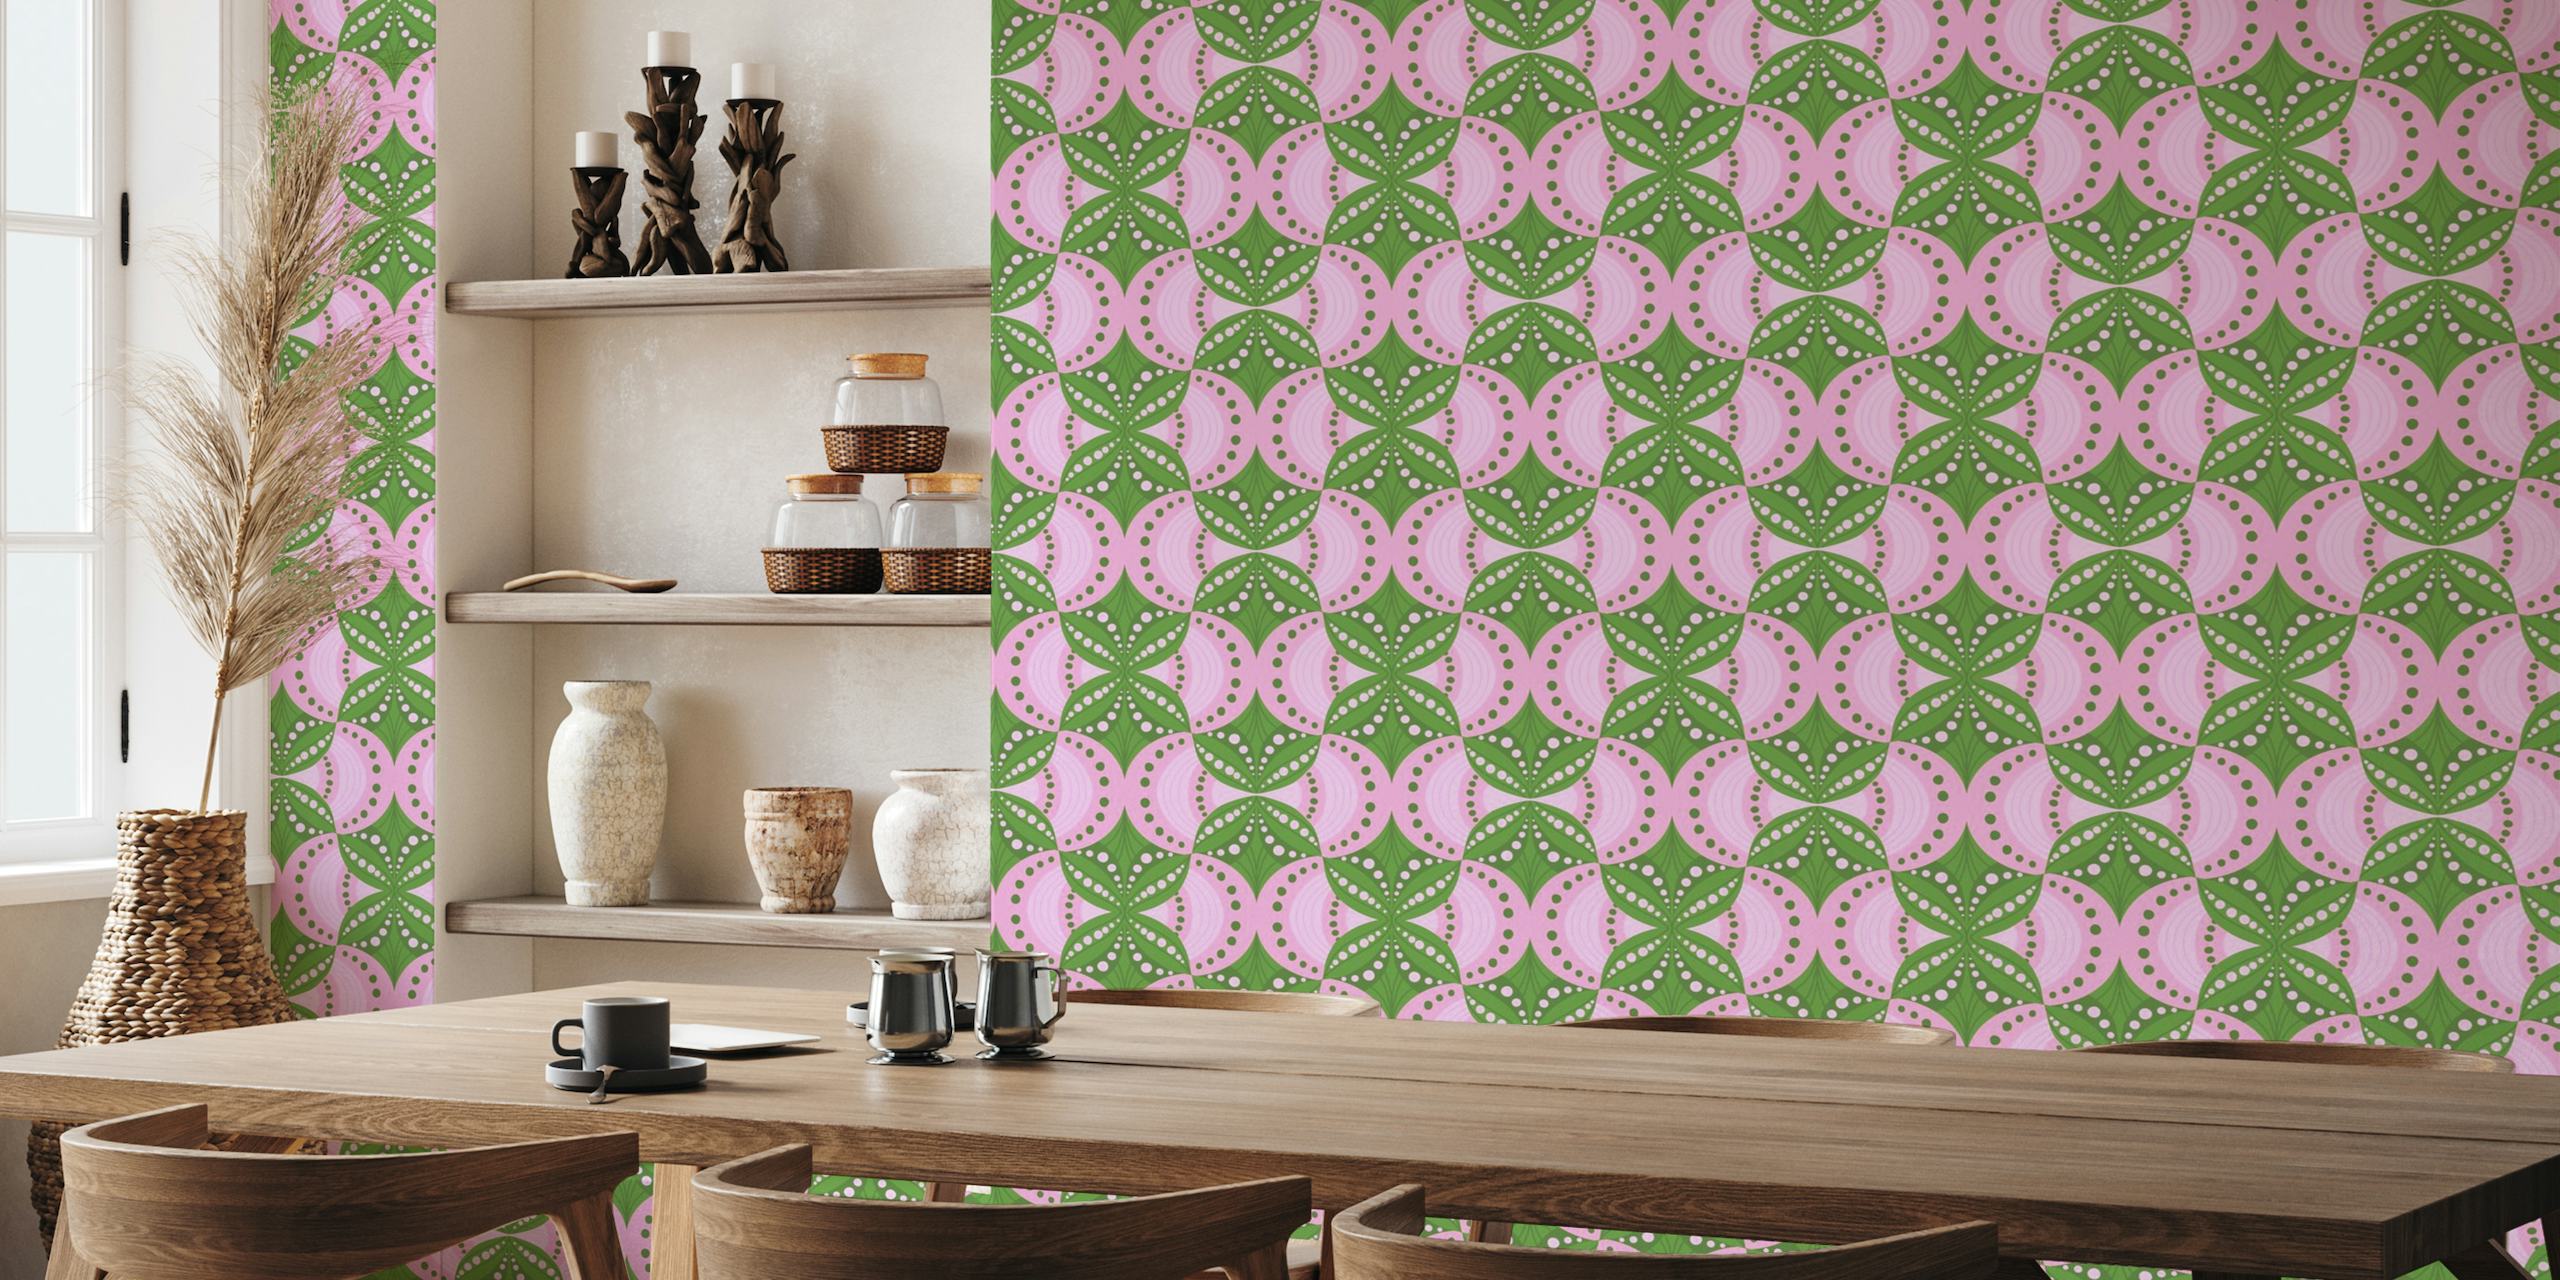 Green and pink geometric scallops ταπετσαρία